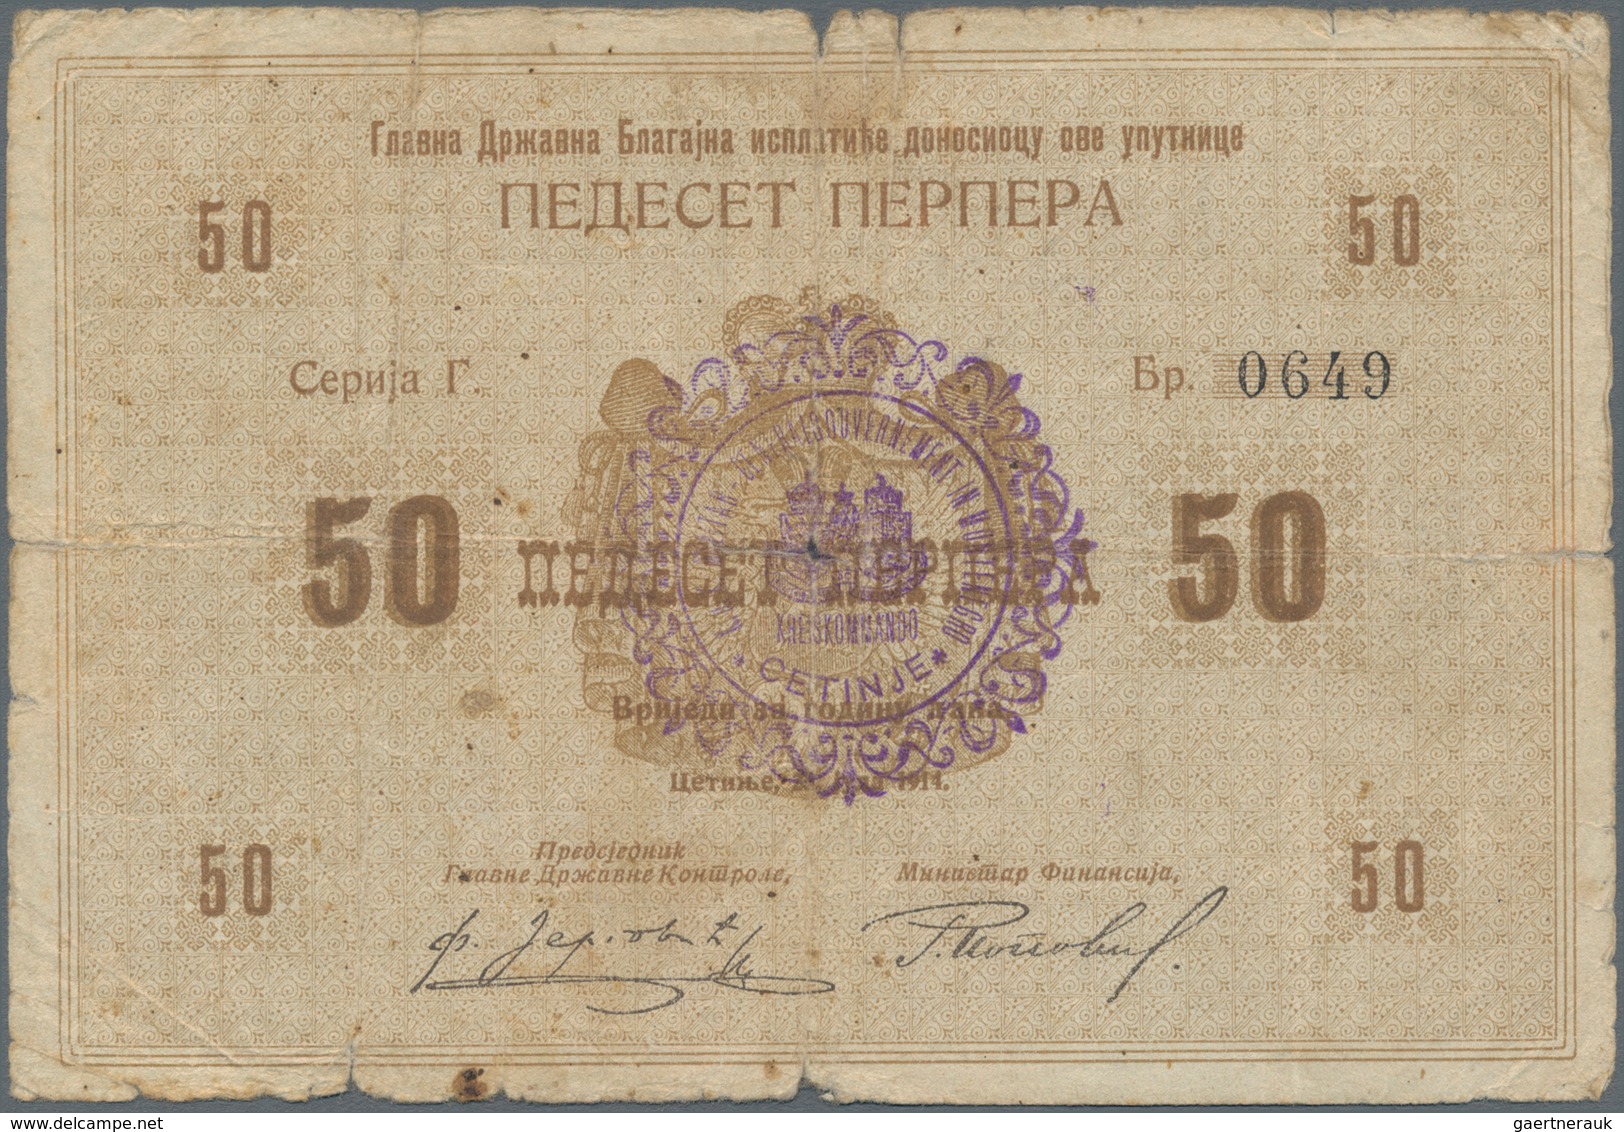 Montenegro: Military Government District Command set with 7 banknotes of the 1914 (1916) handstamped